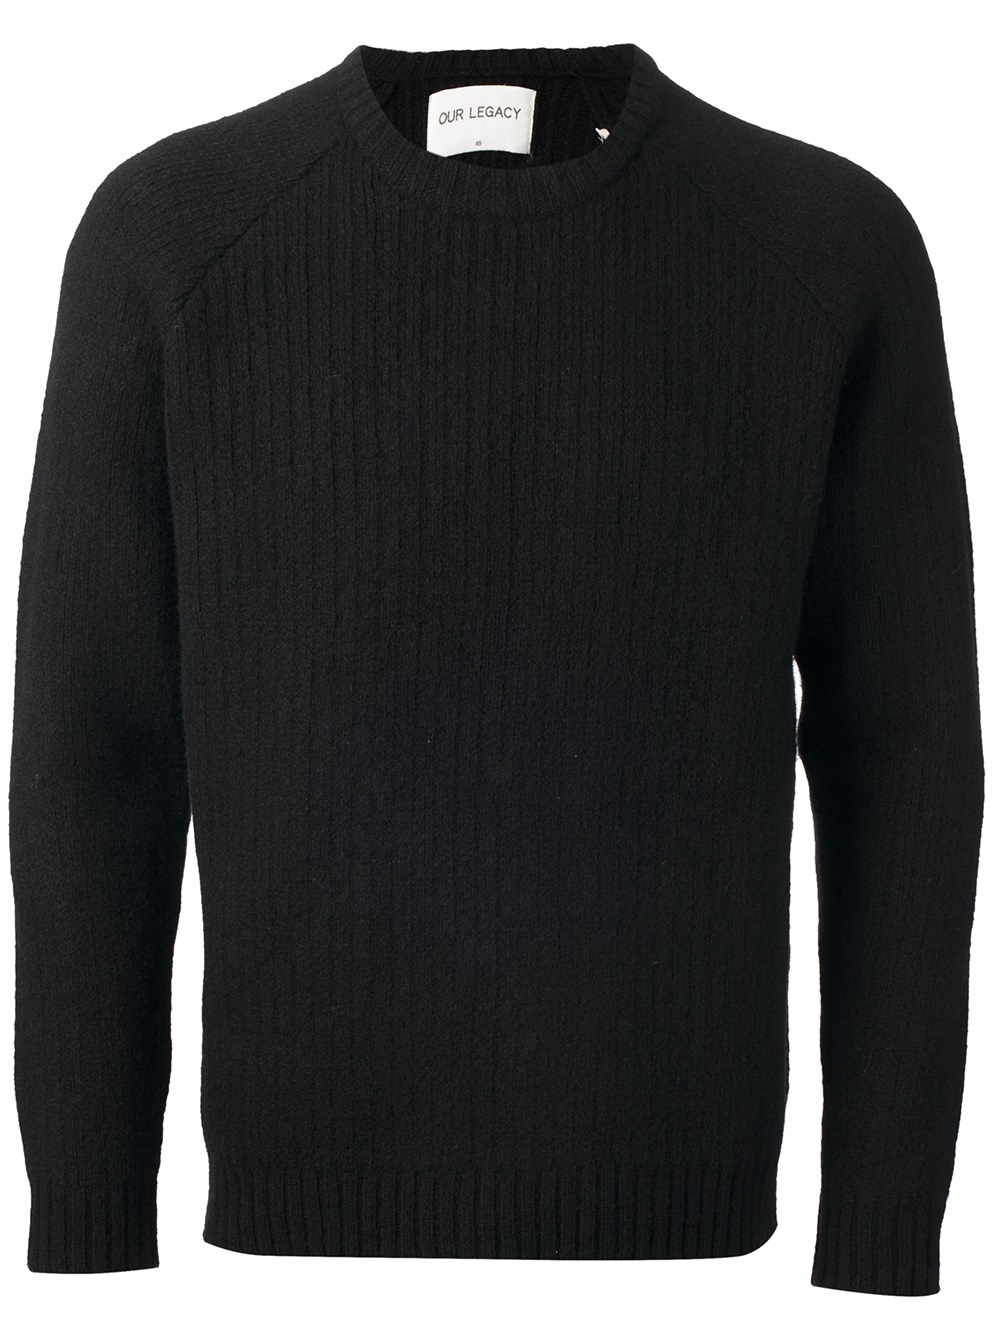 Our Legacy Crew Neck Sweater in Black for Men - Lyst